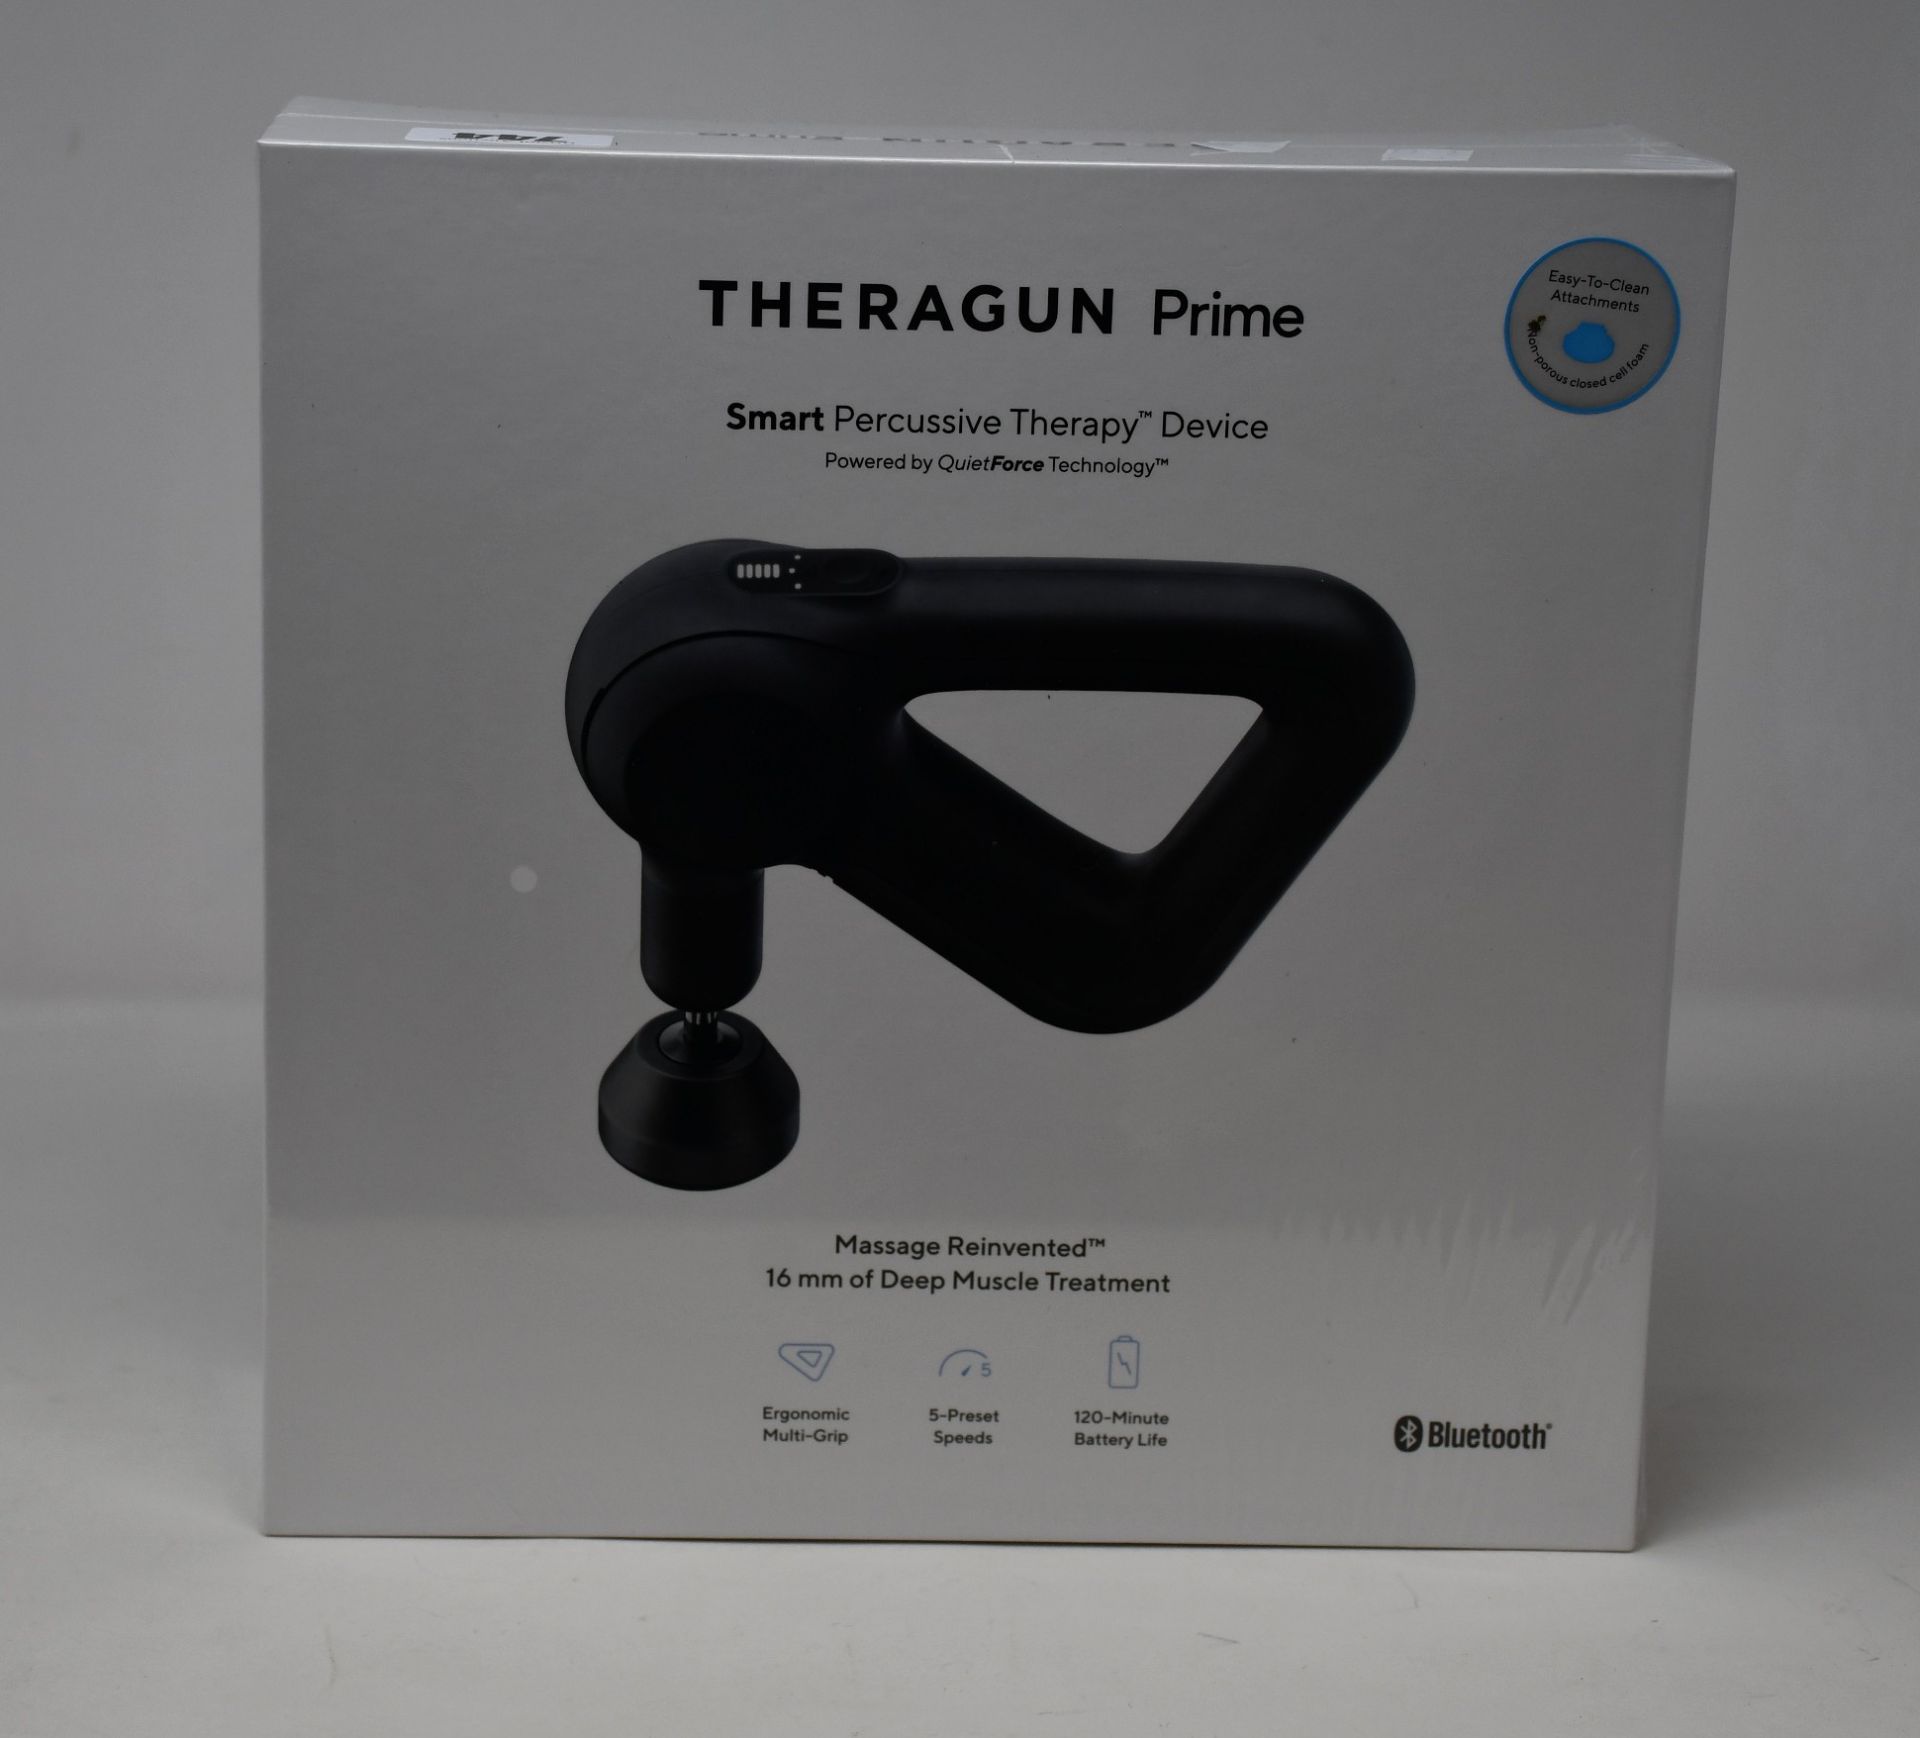 One boxed as new Theragun Prime Smart Percussive Therapy Device.